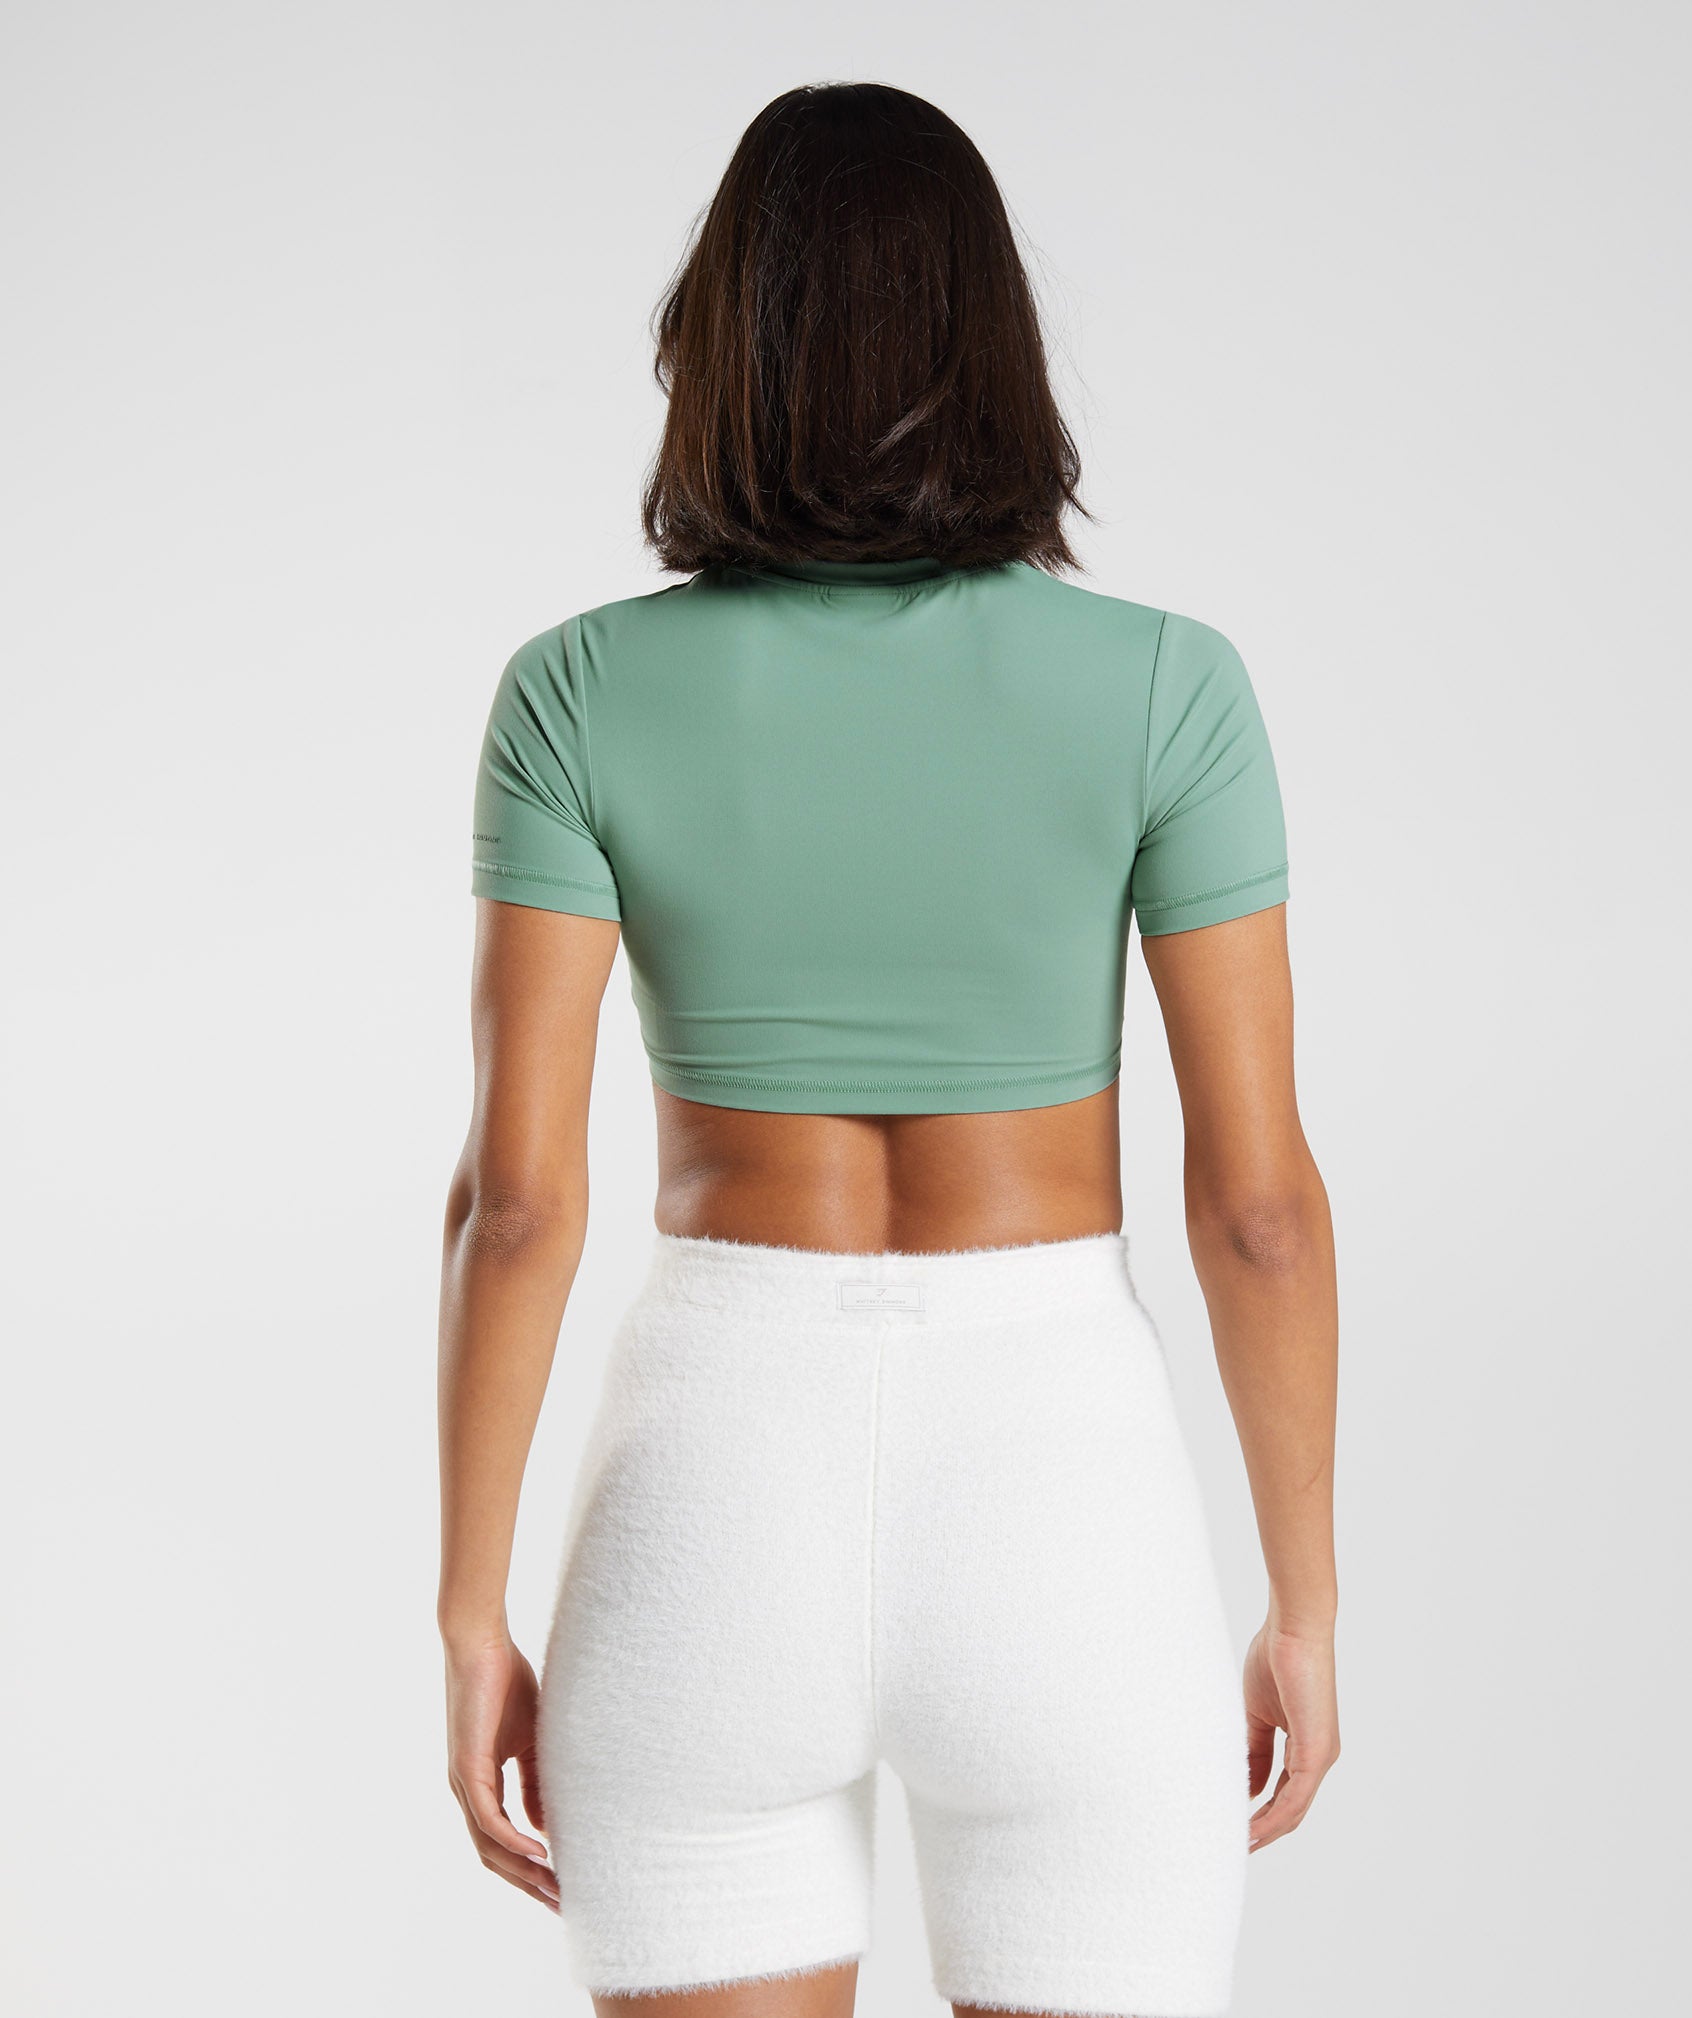 Whitney Short Sleeve Crop Top in Leaf Green - view 2